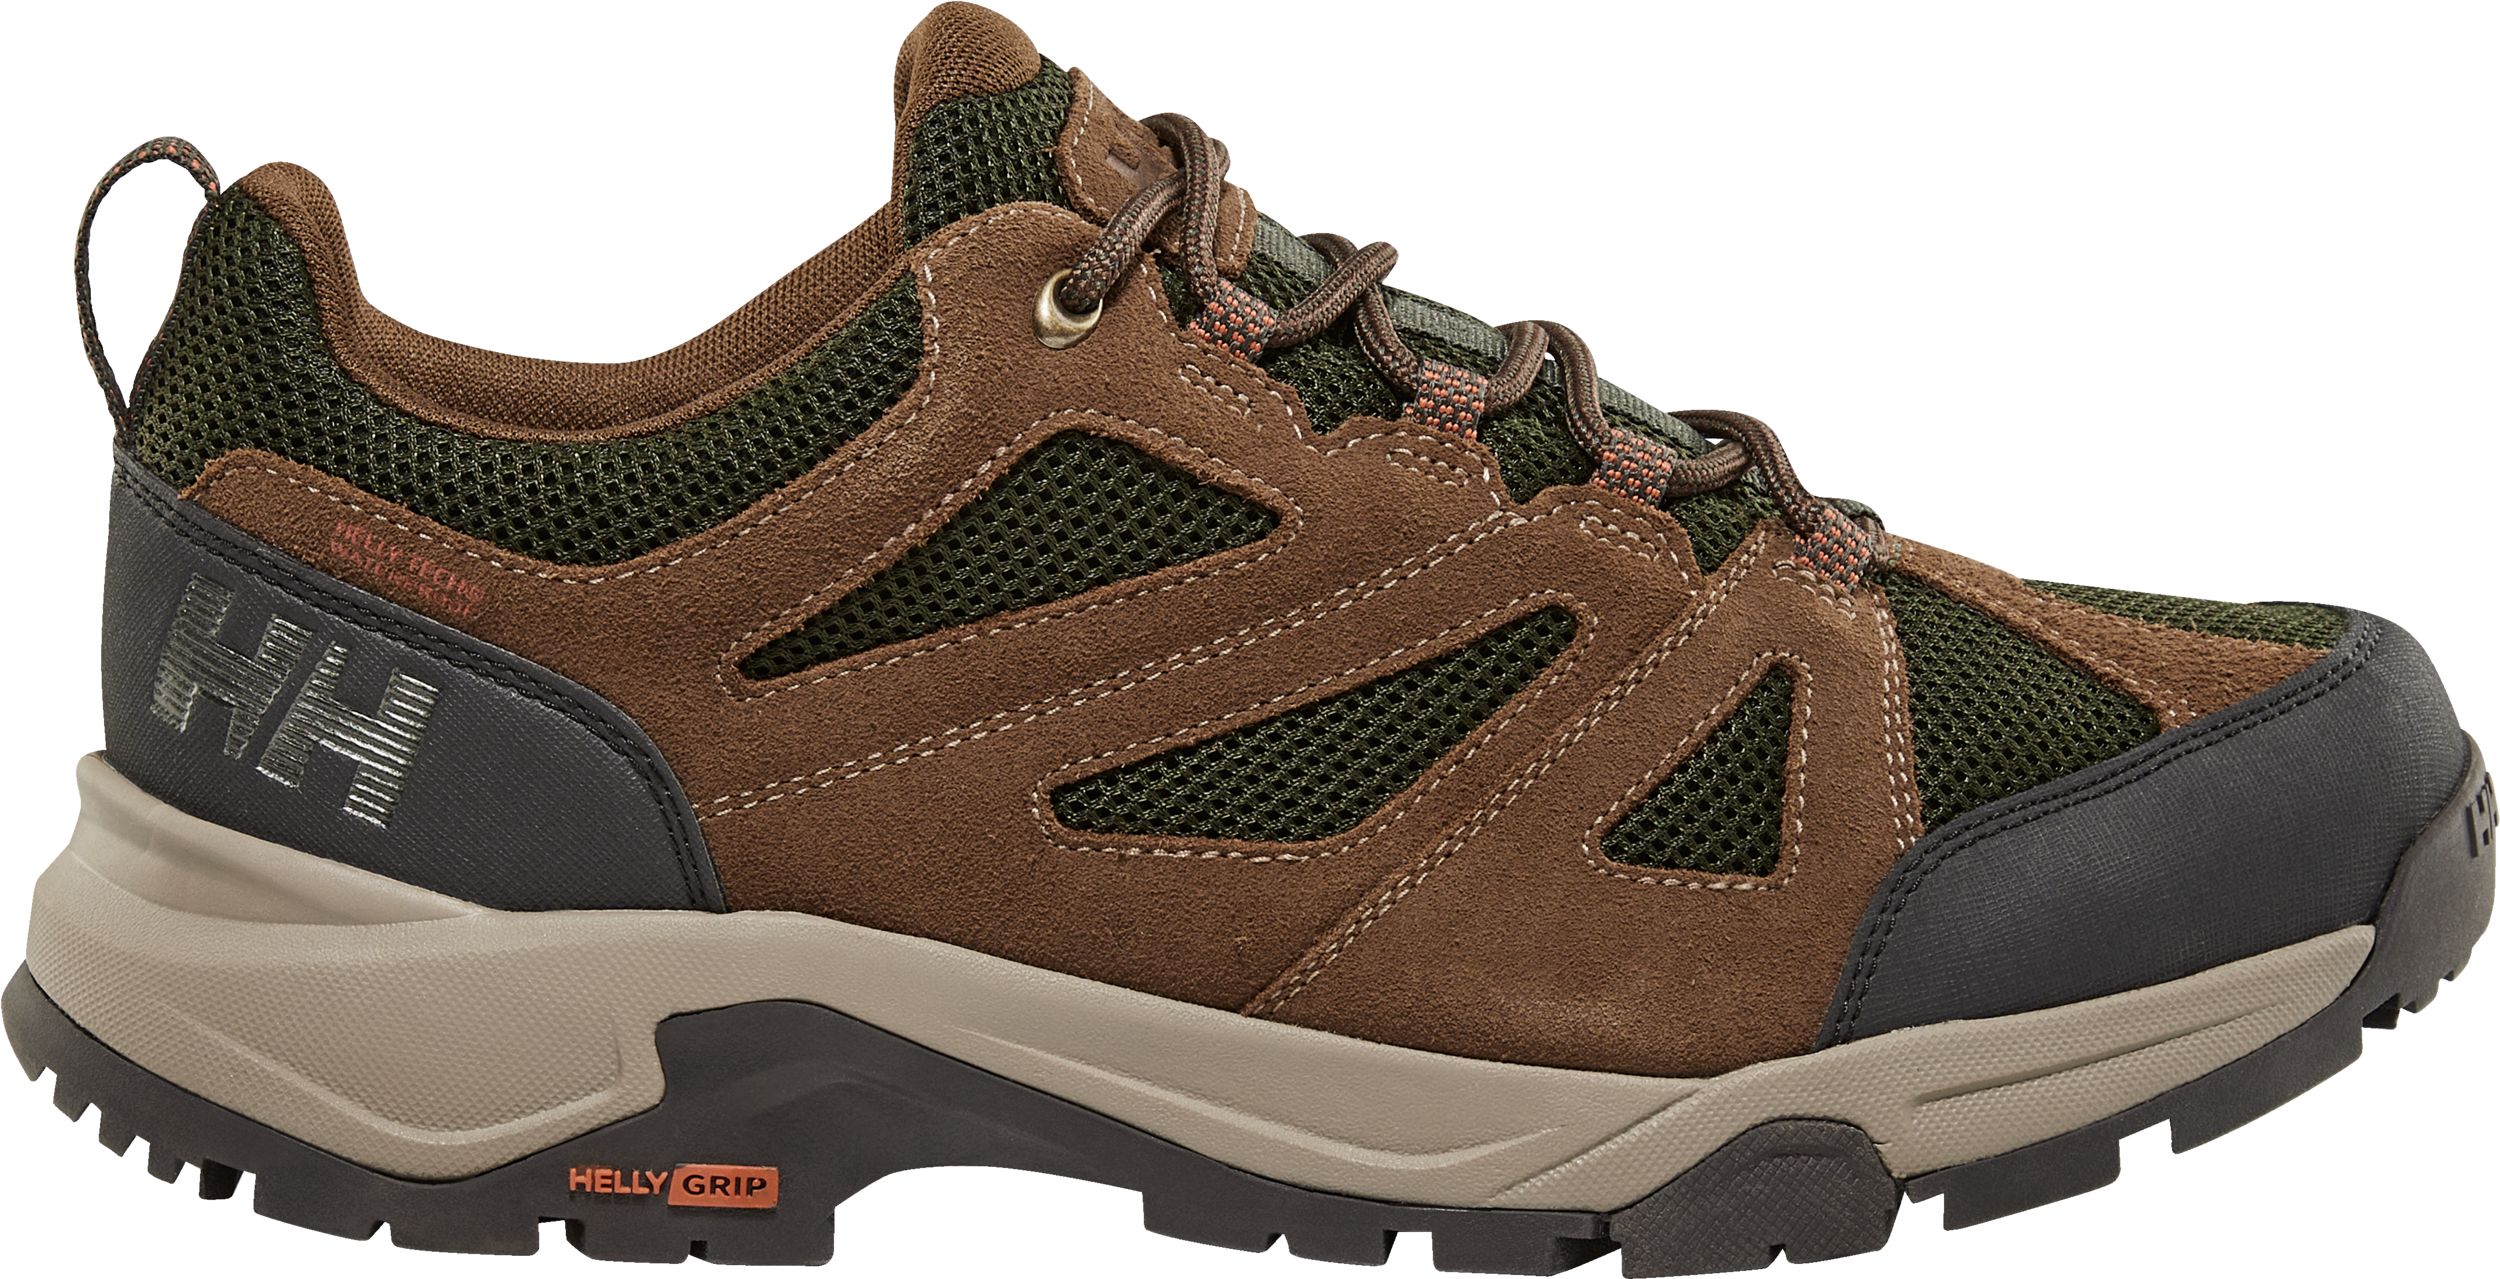 Image of Helly Hansen Men's Switchback Trail HT Hiking Shoes Light weight Day Hiker